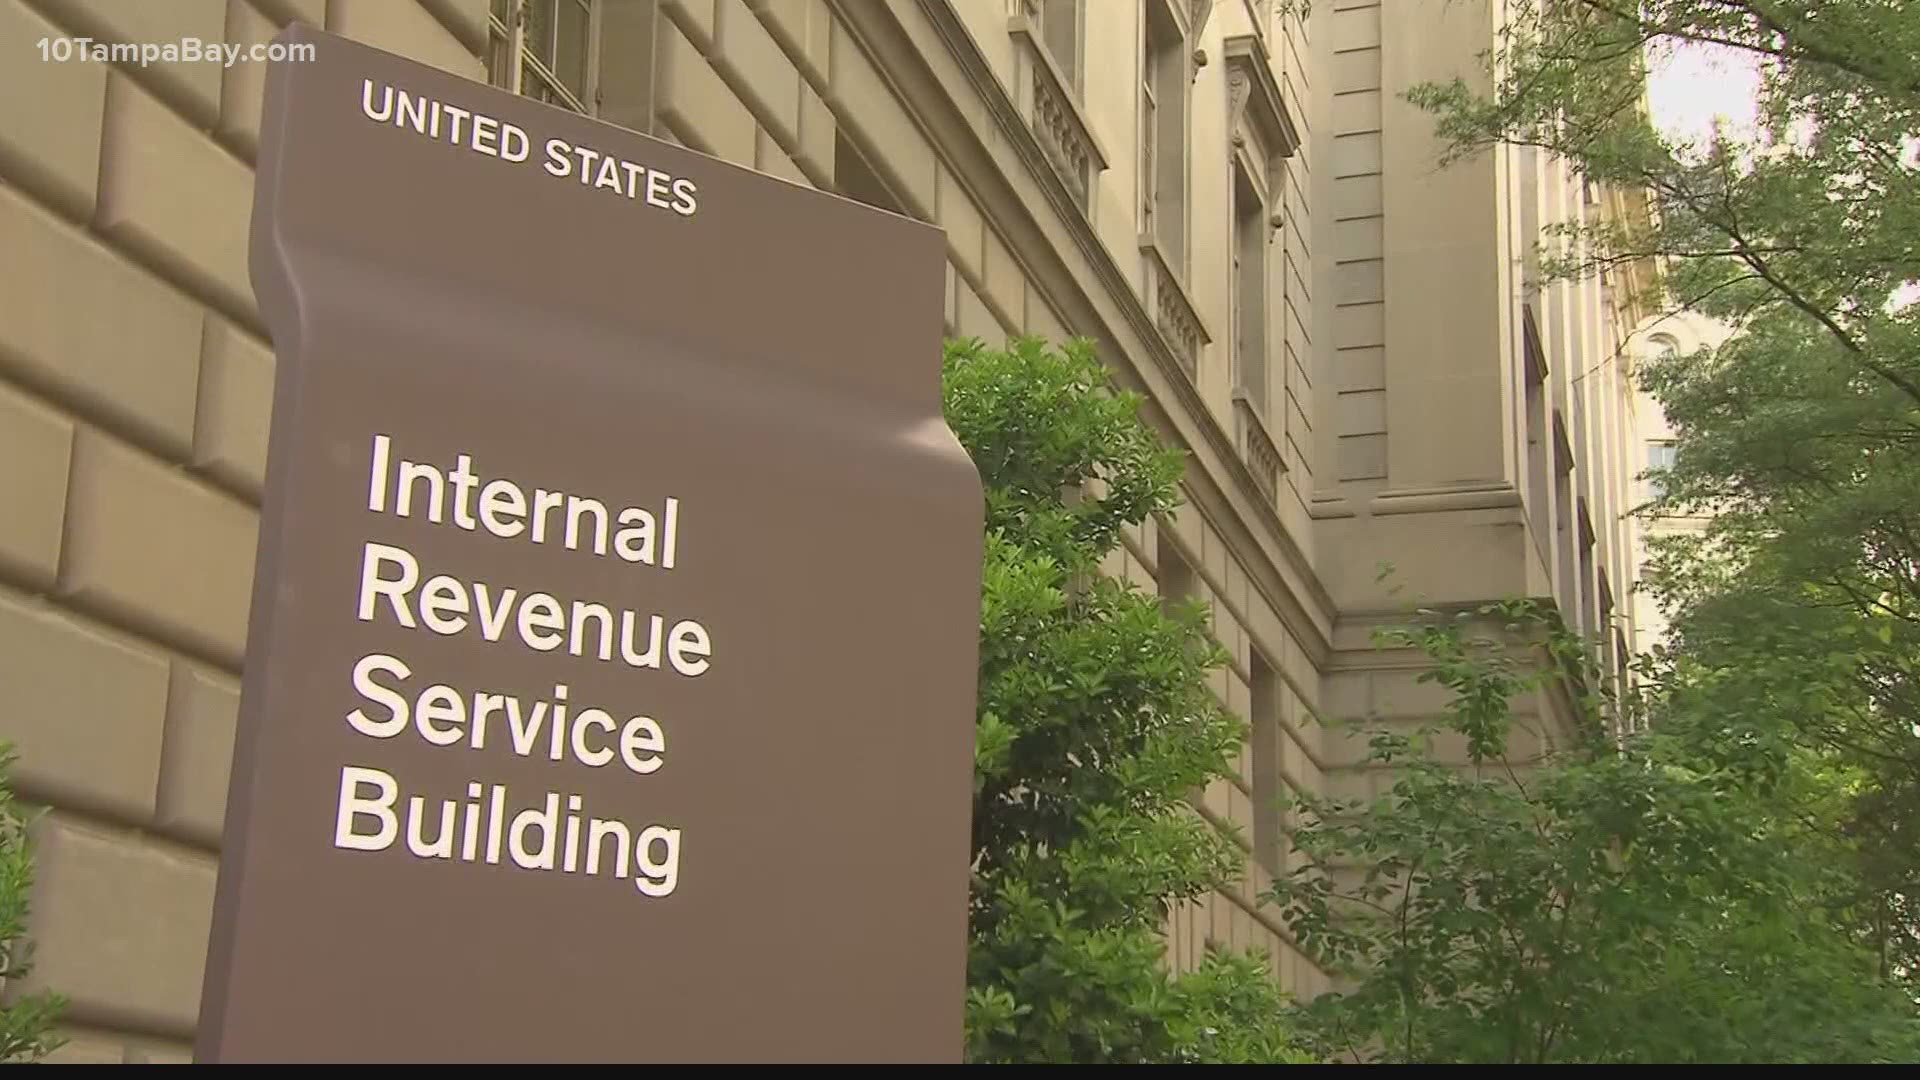 The IRS pushed back the deadline from mid-April to mid-July.